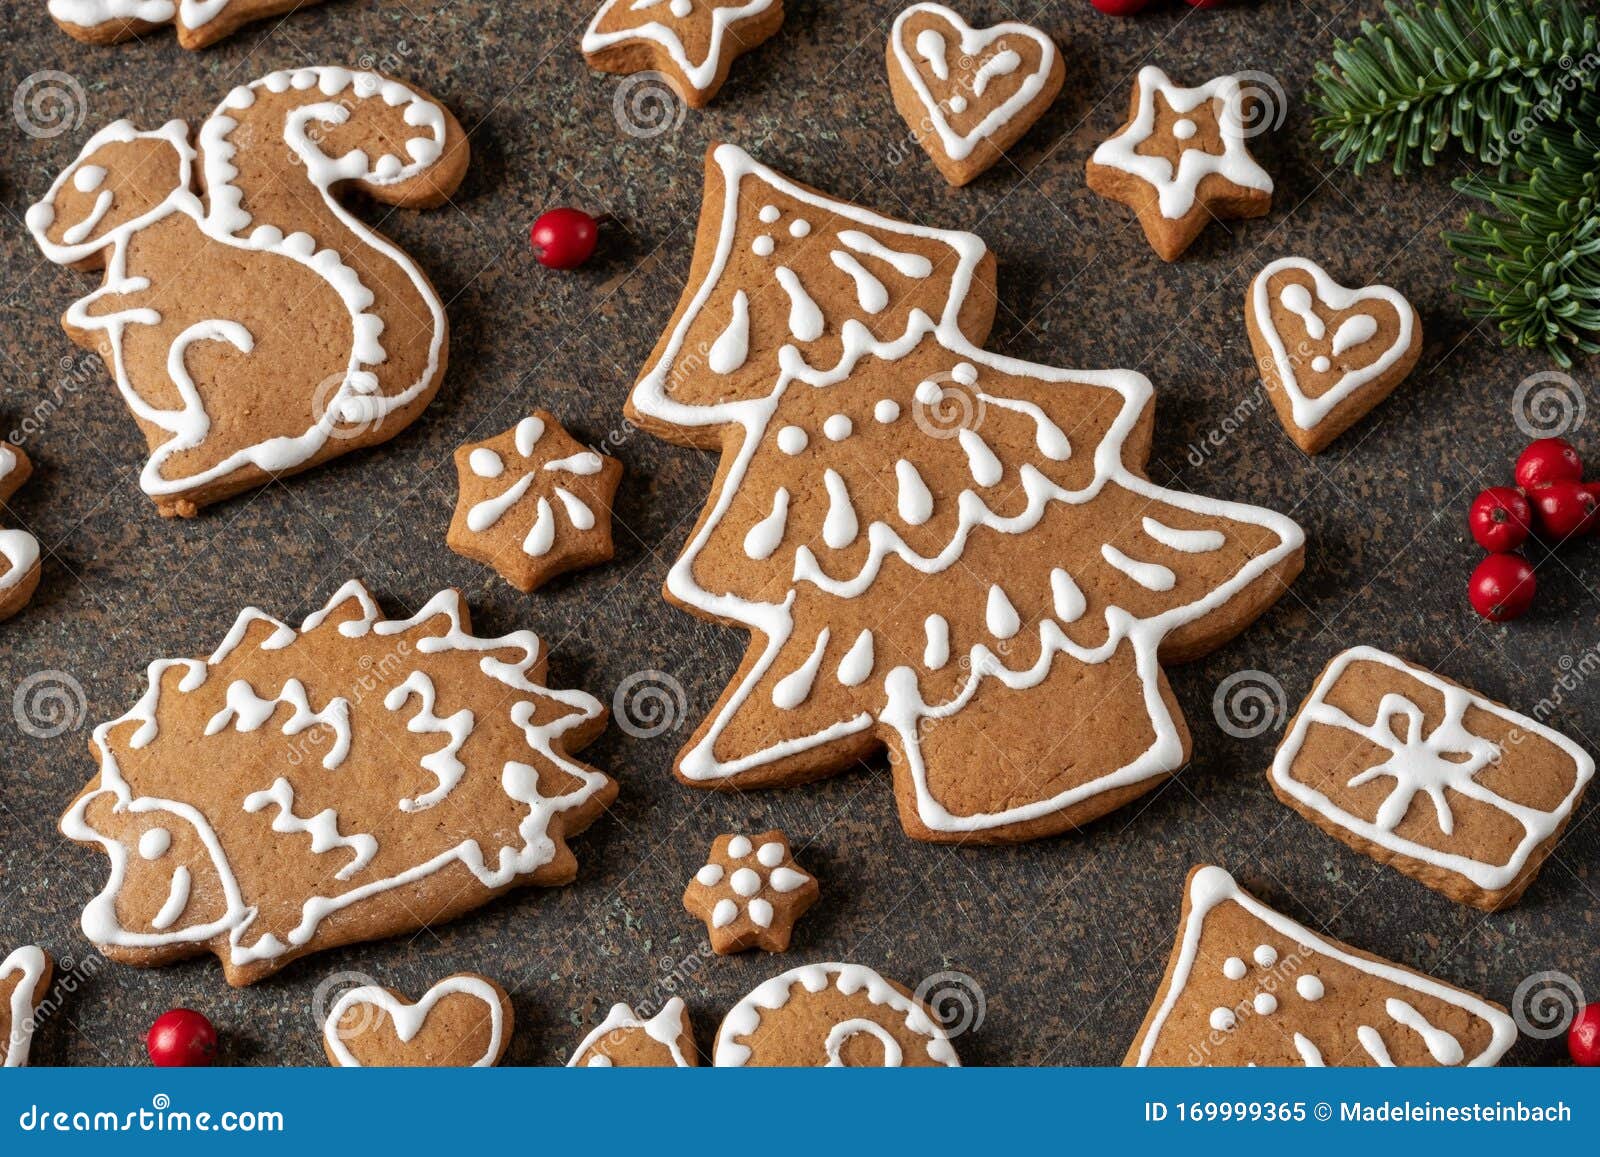 Homemade Christmas Gingerbread Cookies With Holly Berries Stock Image ...